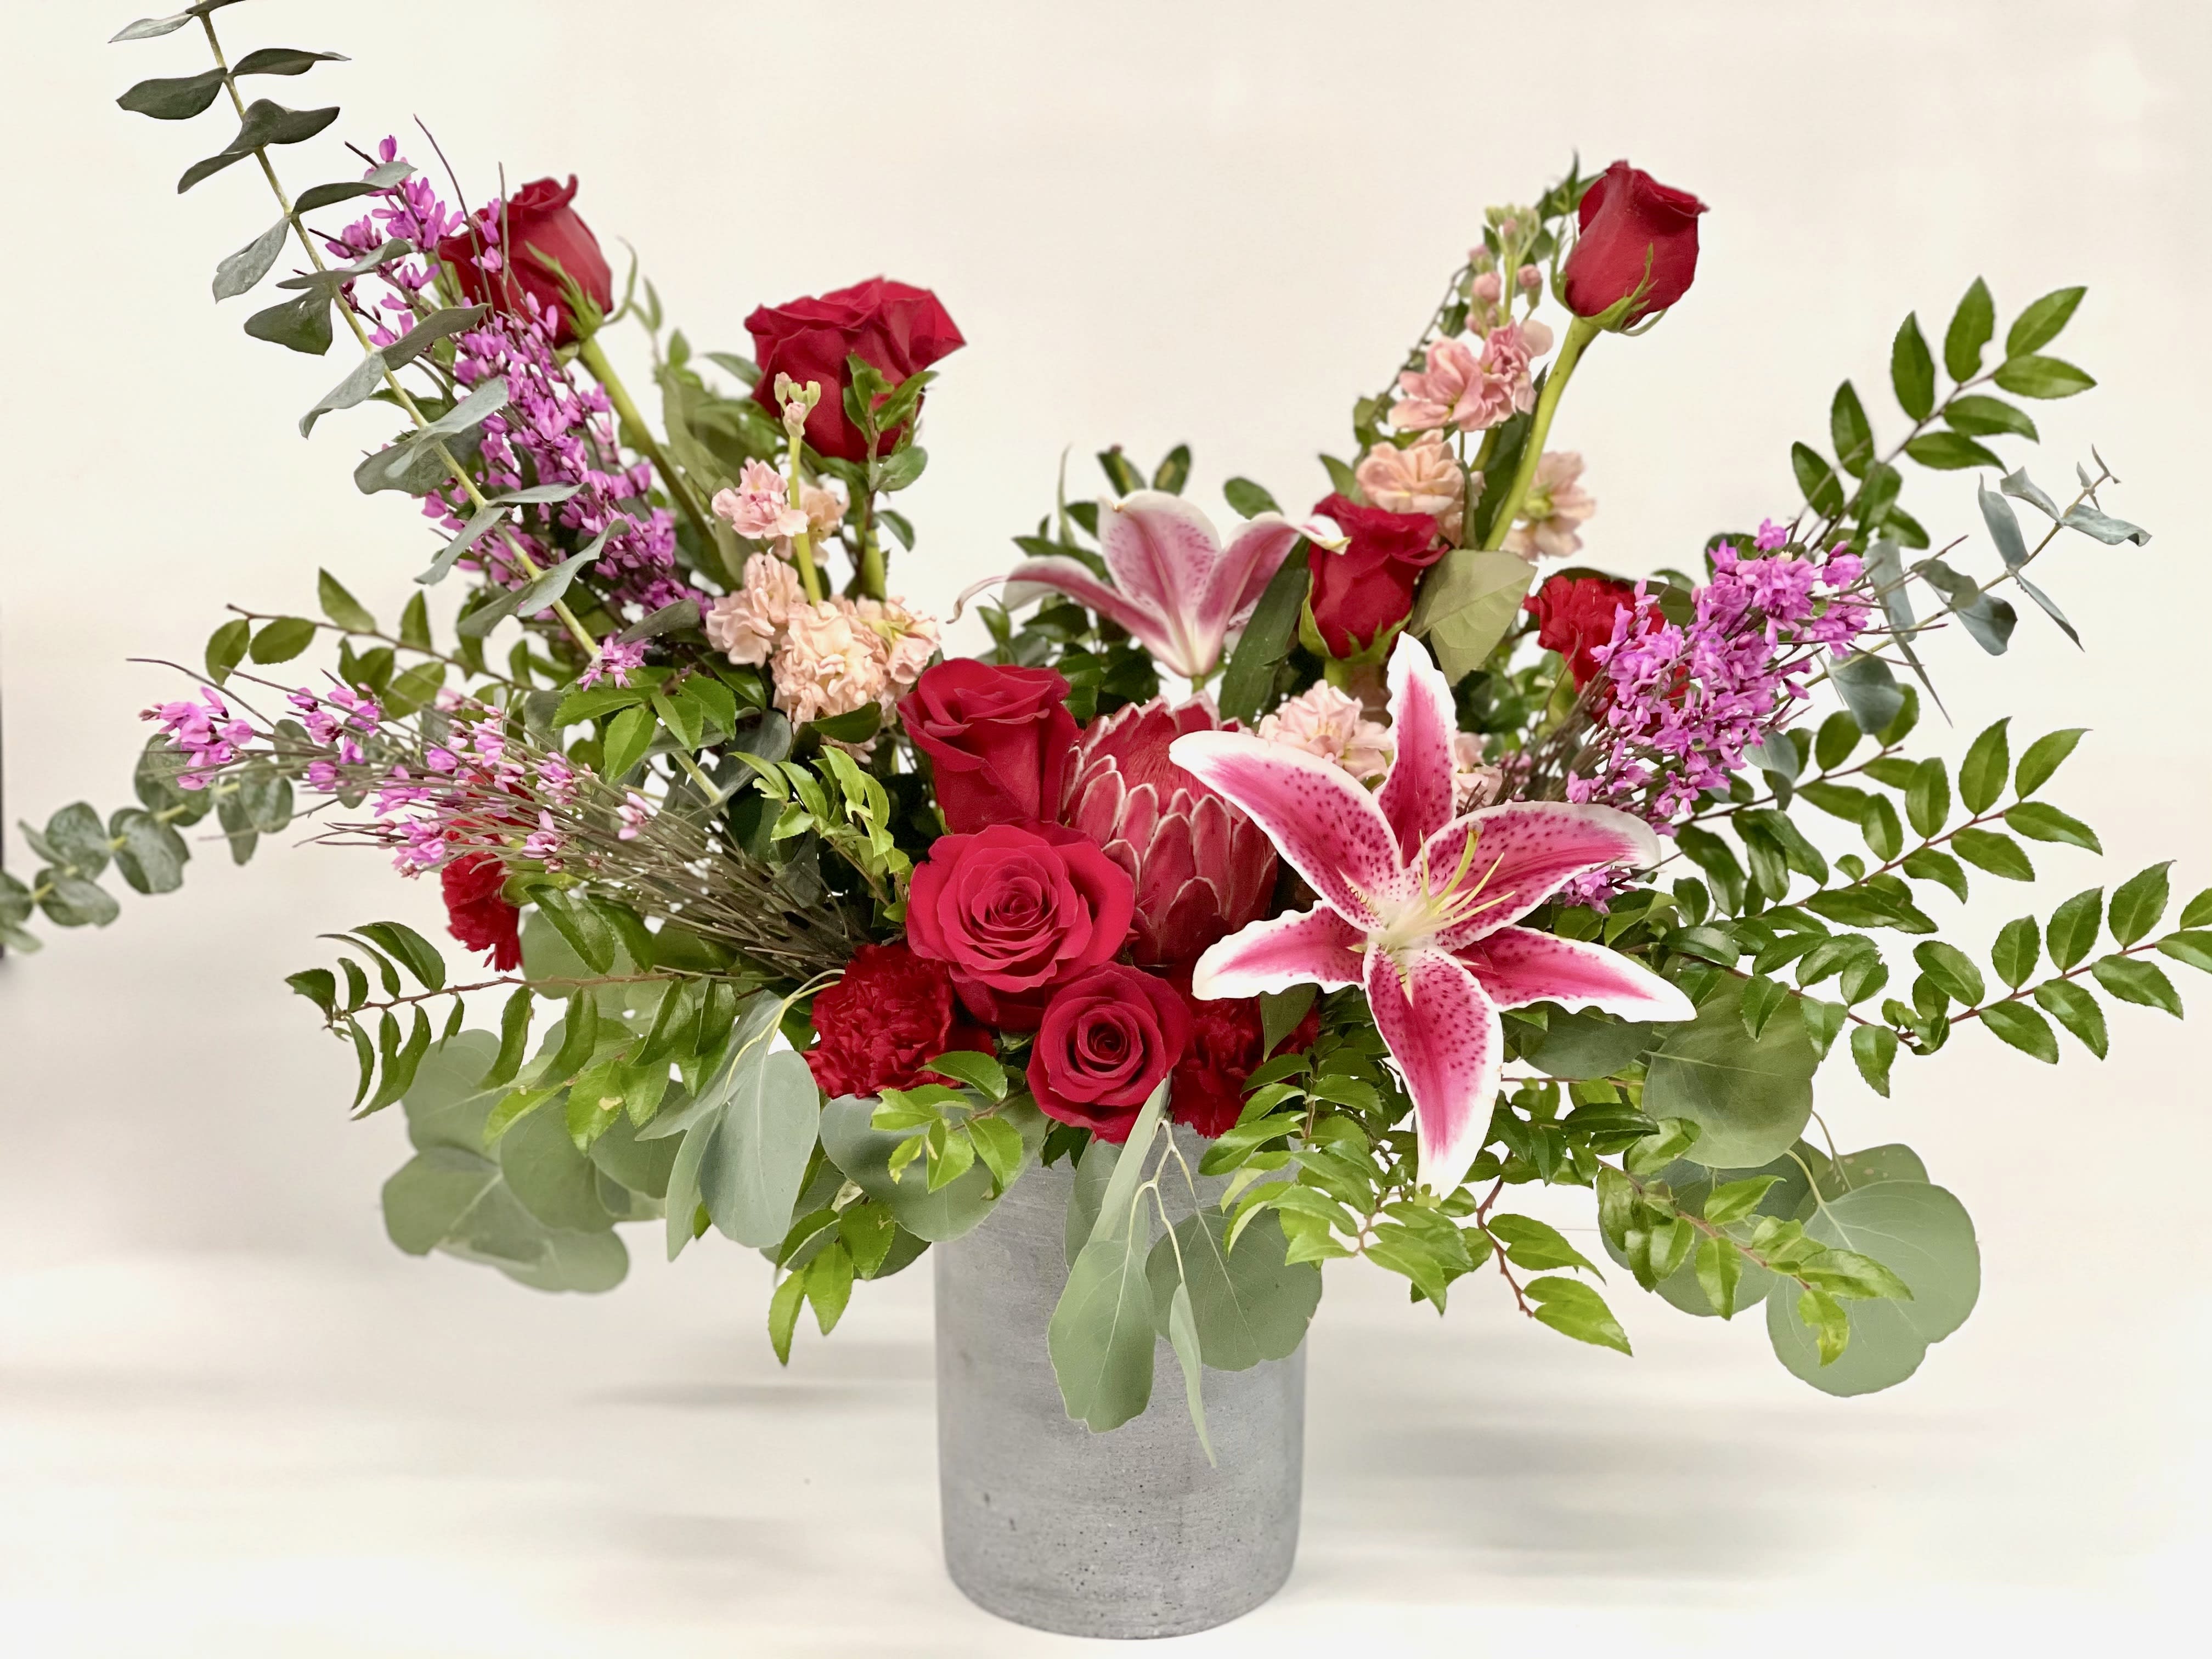 Sienna  - This over the top whimsical bouquet that is sure to wow! Filled ravishing red roses, stargazer lilies, eucalyptus and the ever popular tropical protea!